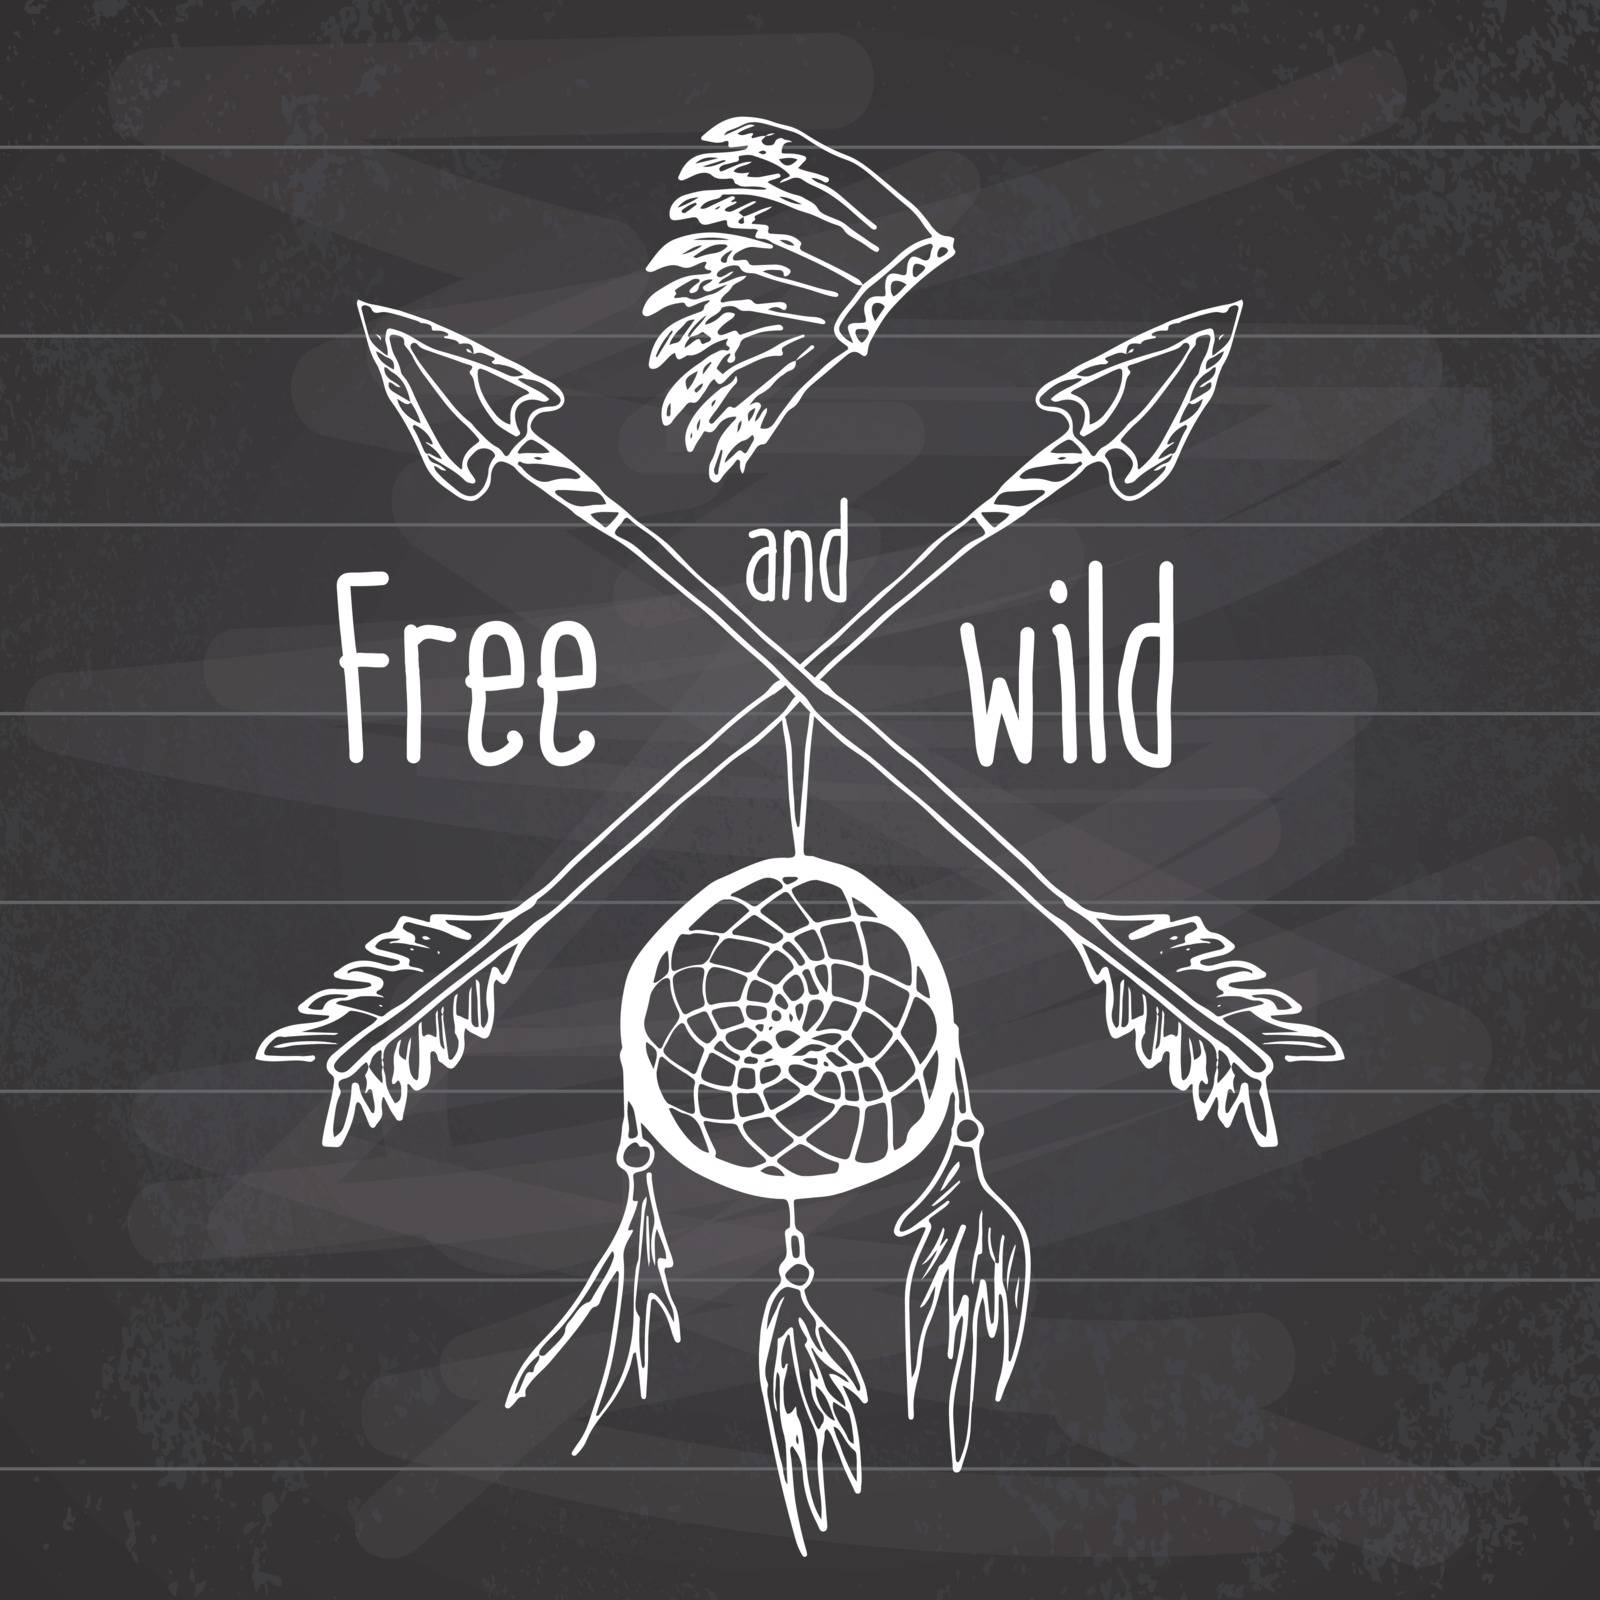 Dream catcher and crossed arrows, tribal legend in Indian style with traditional headgeer. dreamcatcher with bird feathers and beads. Vector vintage illustration, Letters Free and Wild.